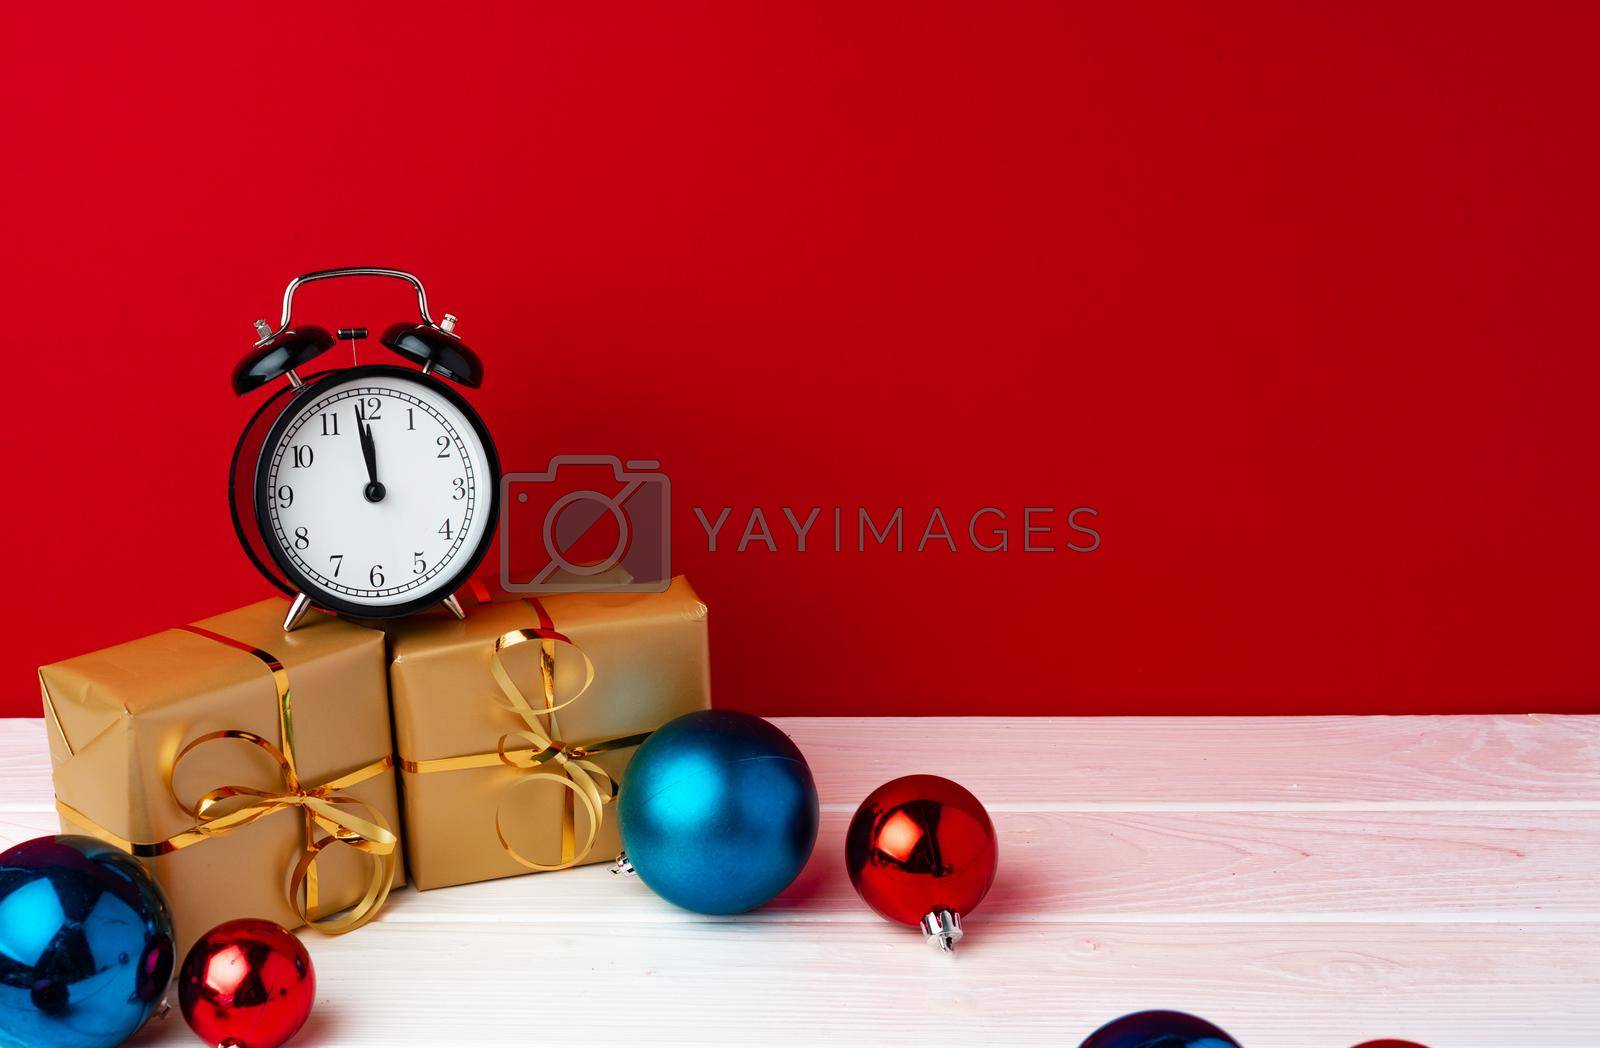 Royalty free image of Christmas and New Year countdown concept with alarm clock by Fabrikasimf